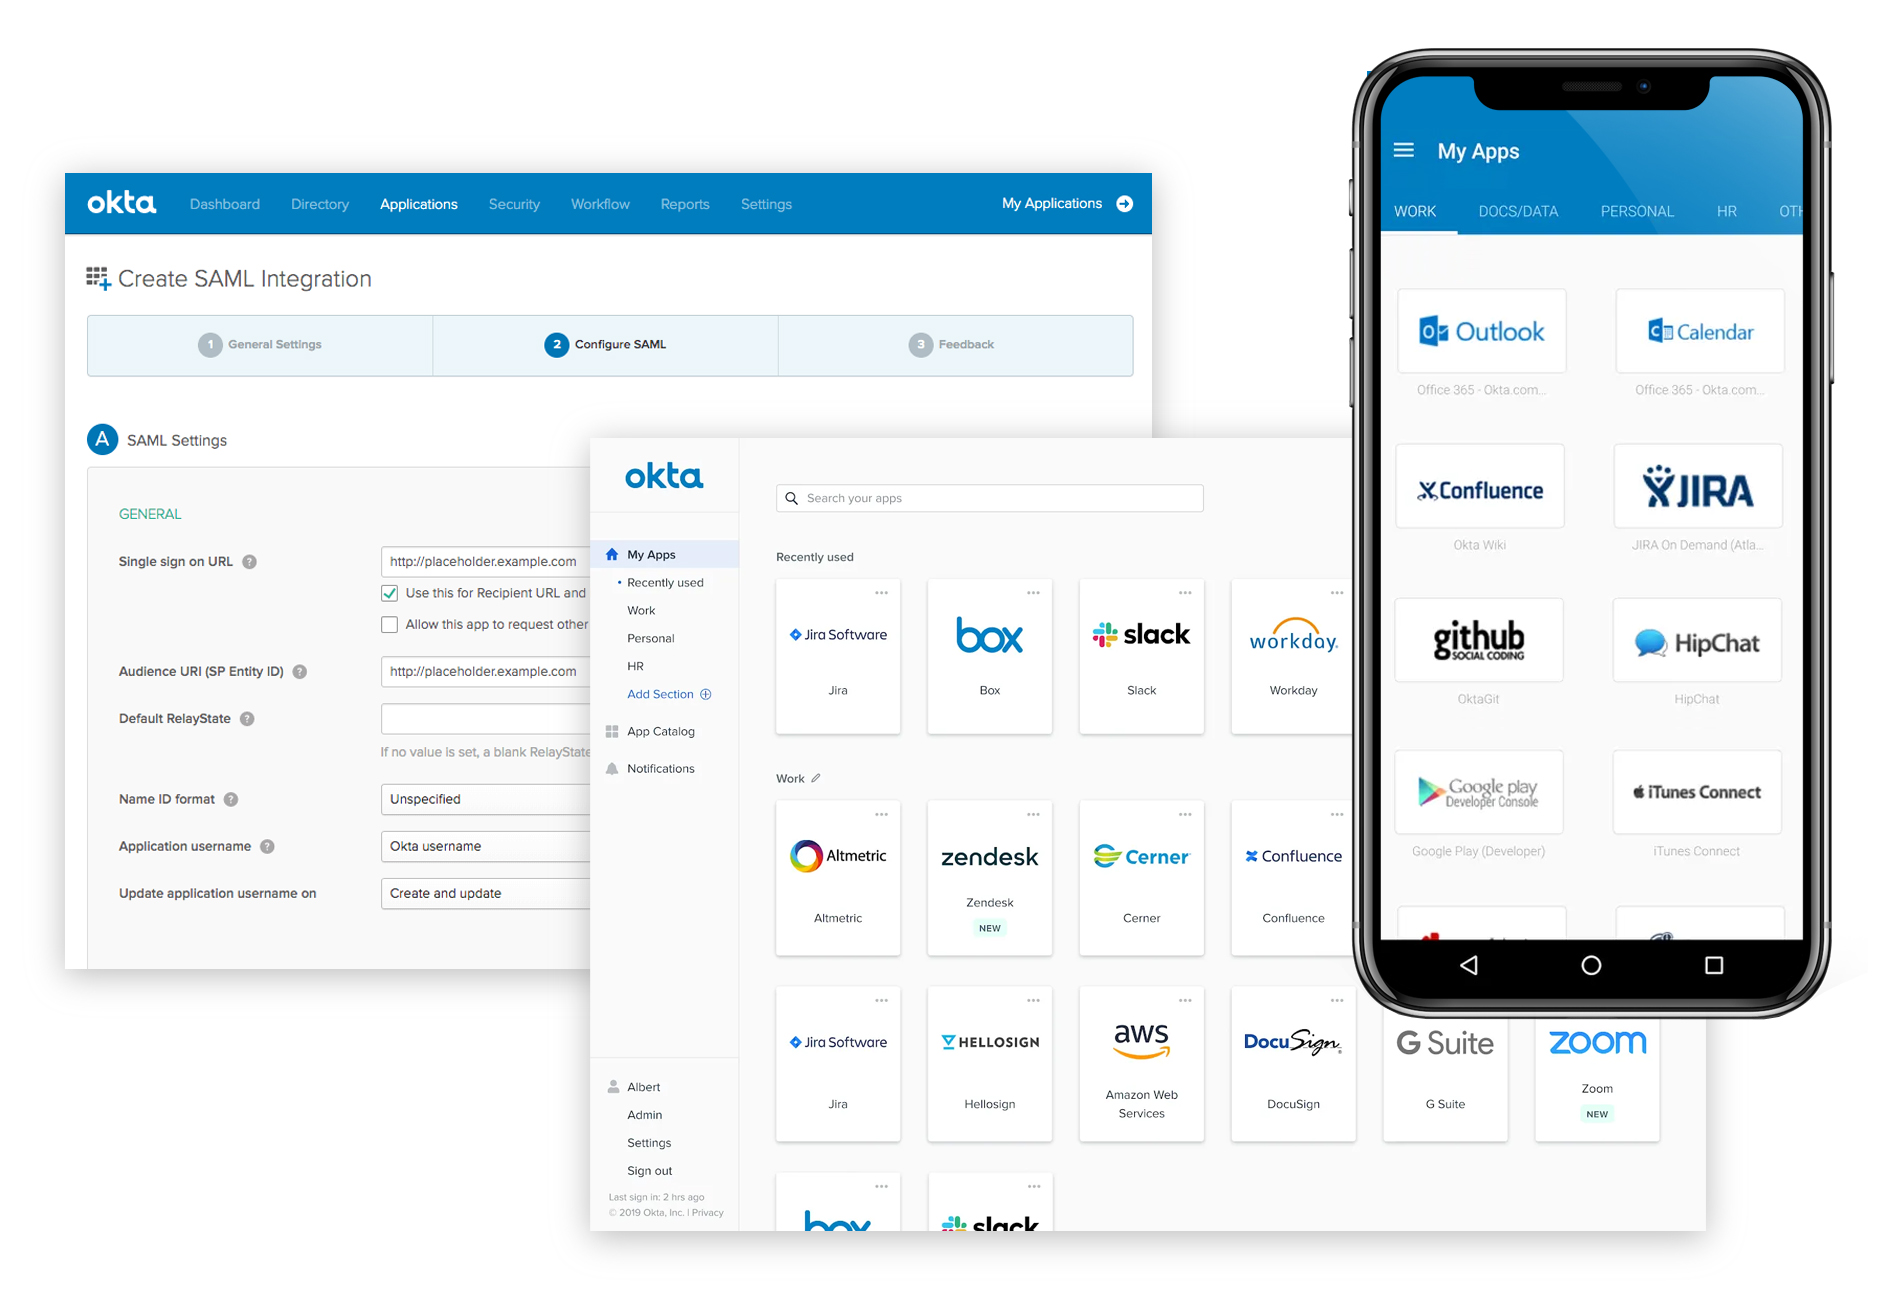 Okta featured image - a collection of screenshots showing the login capabilities with multiple app brands, as well as an inset of a mobile device with the mobile login screen